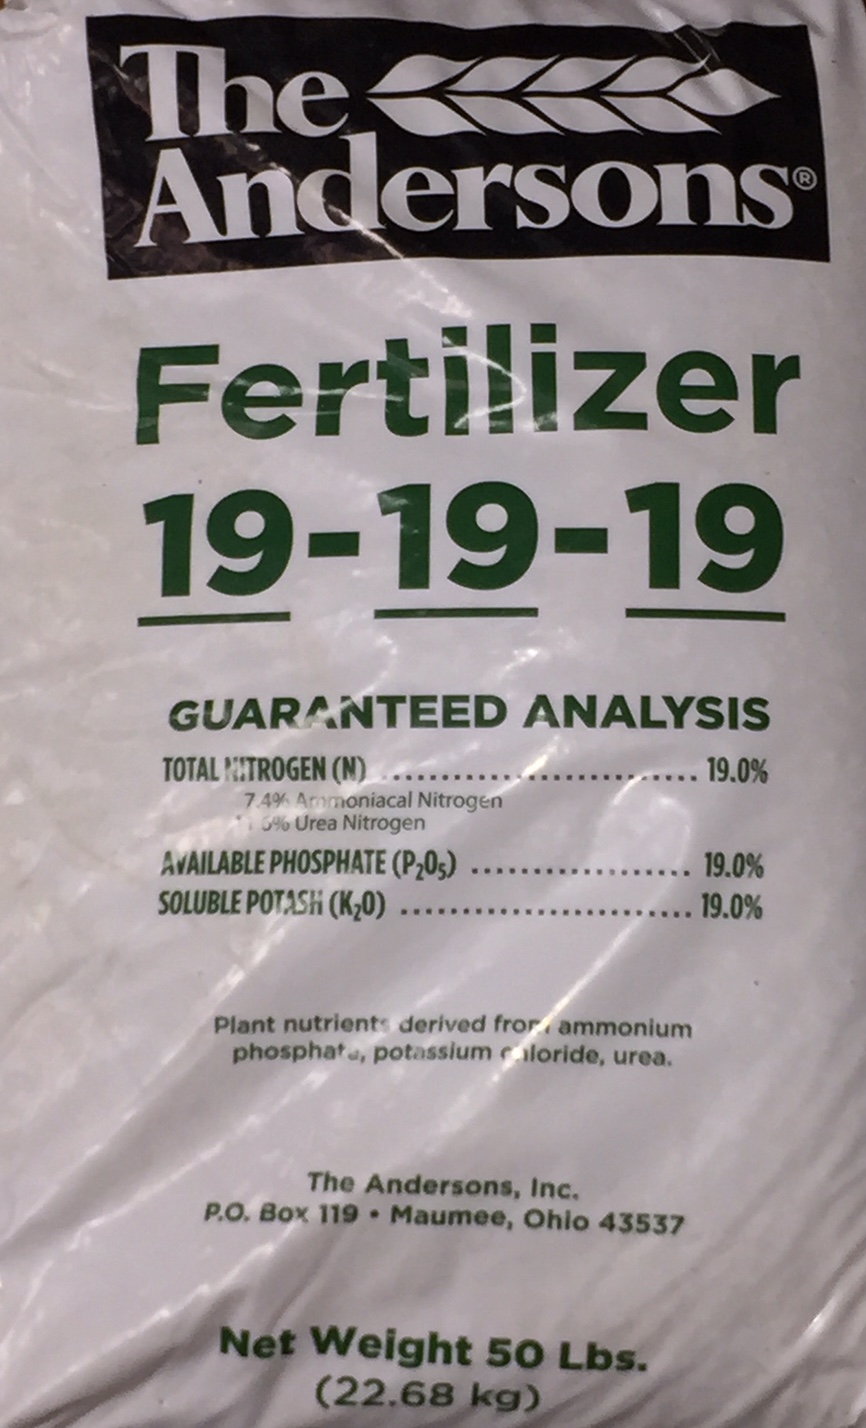 19-19-19 Fertilizer: Guide To Using on Lawns, Gardens & More